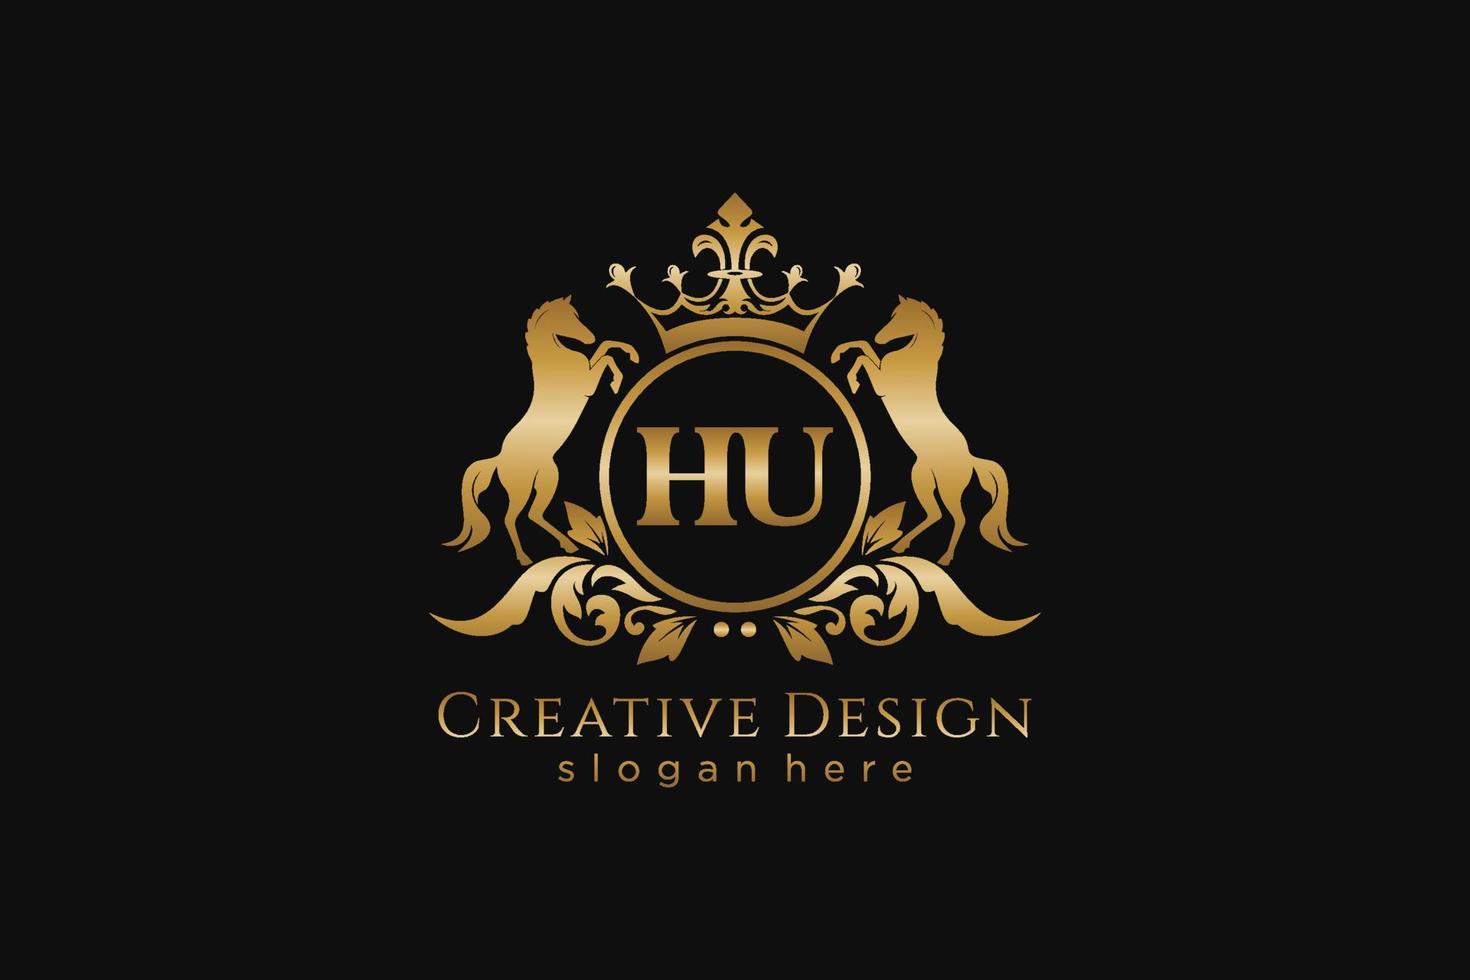 initial HU Retro golden crest with circle and two horses, badge template with scrolls and royal crown - perfect for luxurious branding projects vector